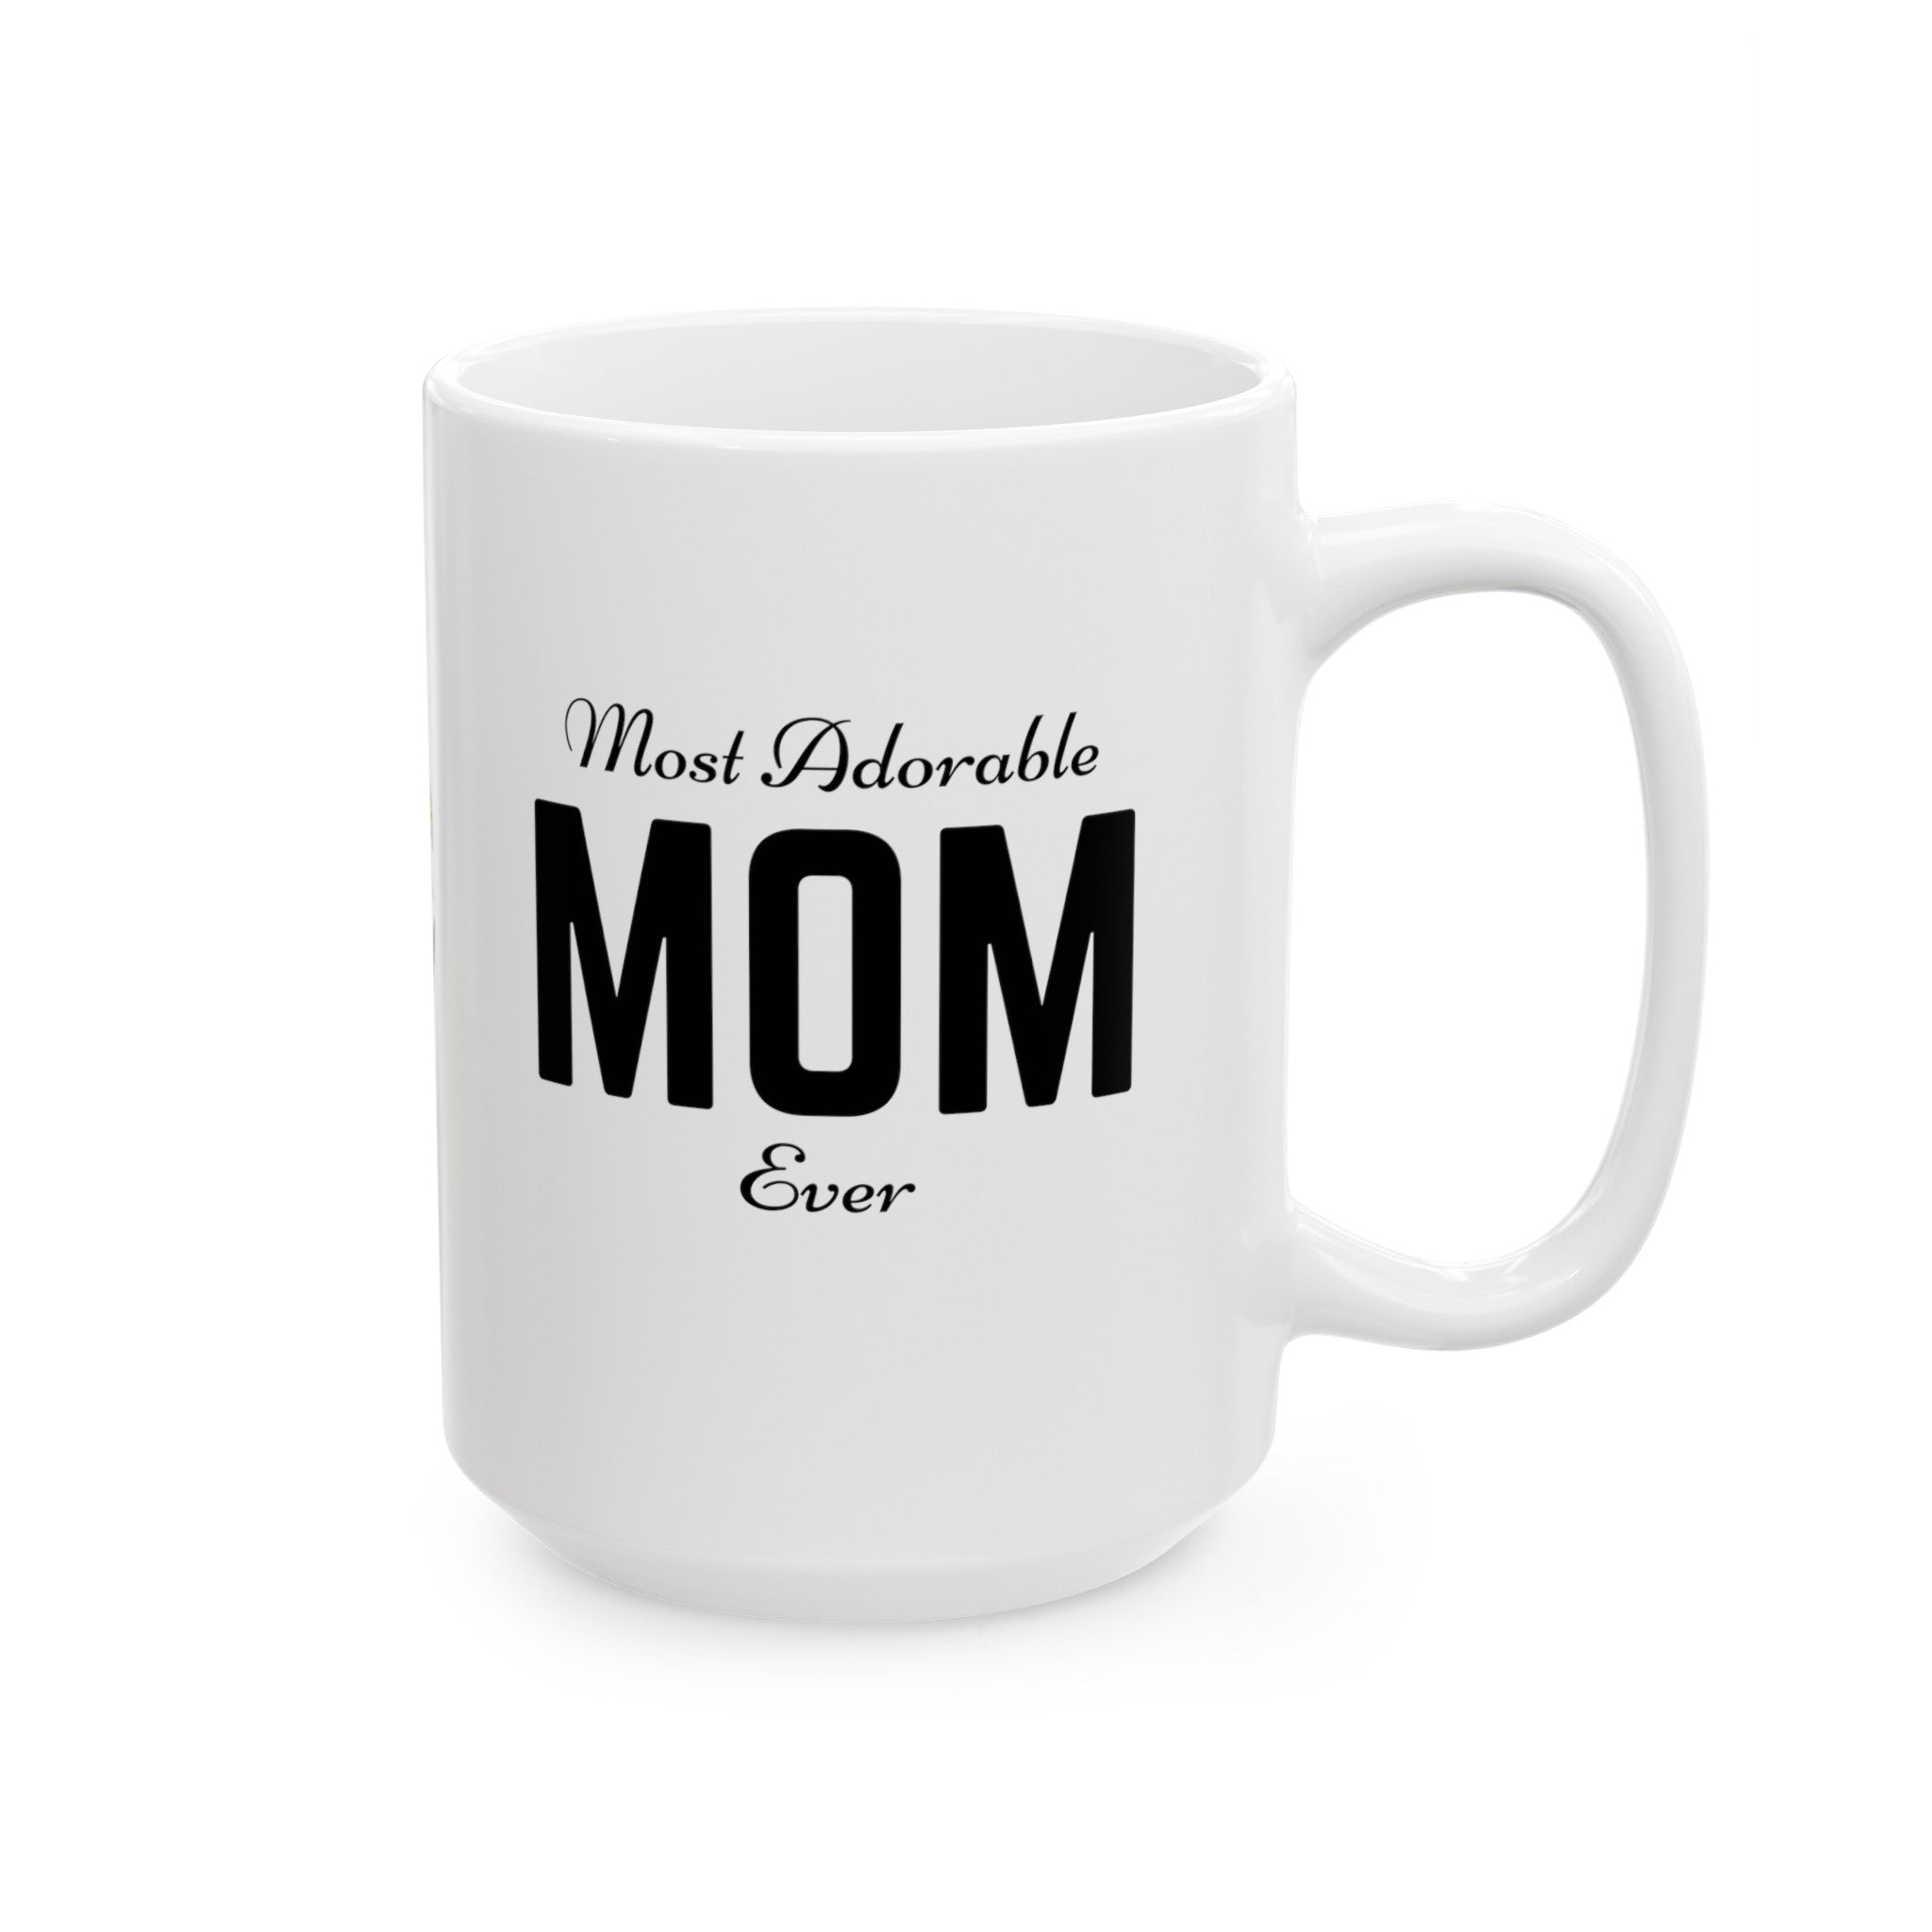 Mother's Day Gift Most Adorable Mom Ceramic Mug, (11oz, 15oz) with Flowers, Mother's Day Mug, Best Mother's Day Gift, Gift for Mom